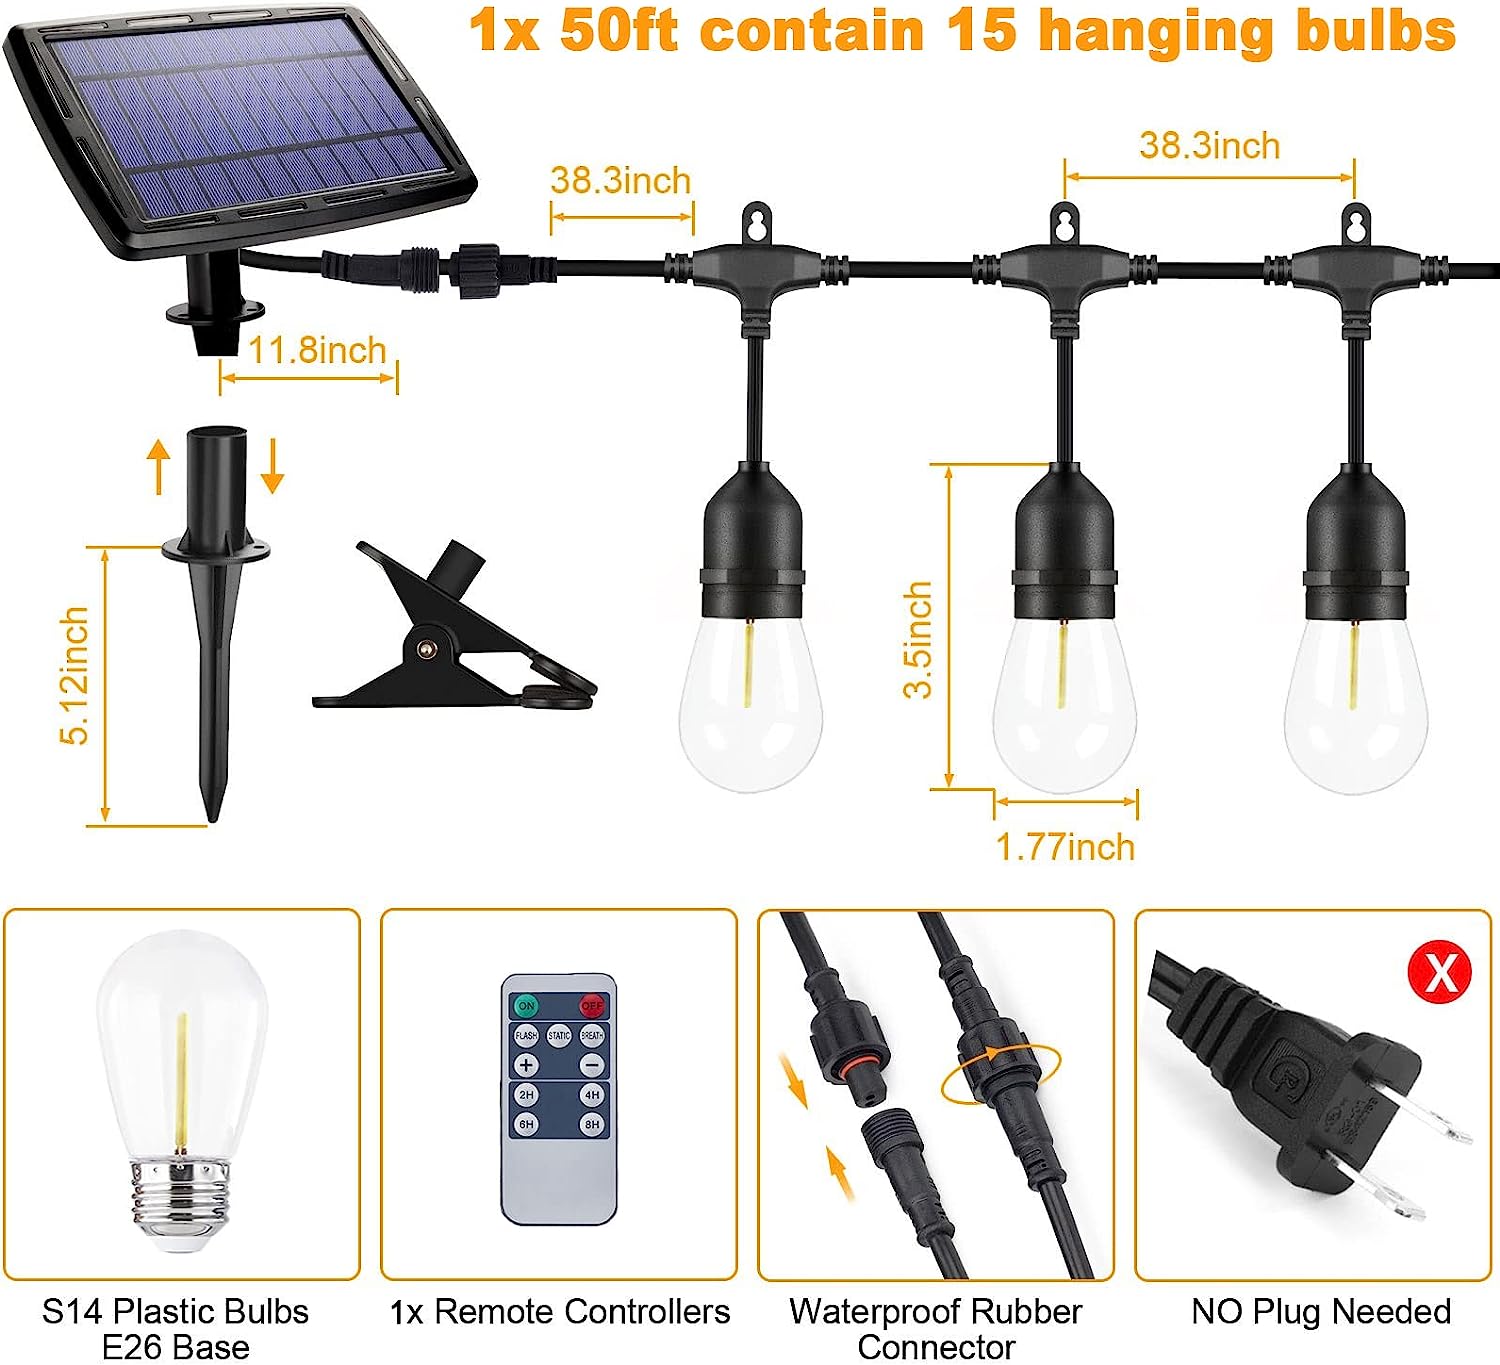 Solar String Lights with Remote Control, IPStank 50FT - Buy Solar String Lights with Remote Control, IPStank 50FT in Dubai - HOCC Dubai - Baby playground outdoor - Shop baby product - Shop Pet product - shop home decor and lighting in Dubai - HOCC Dubai -